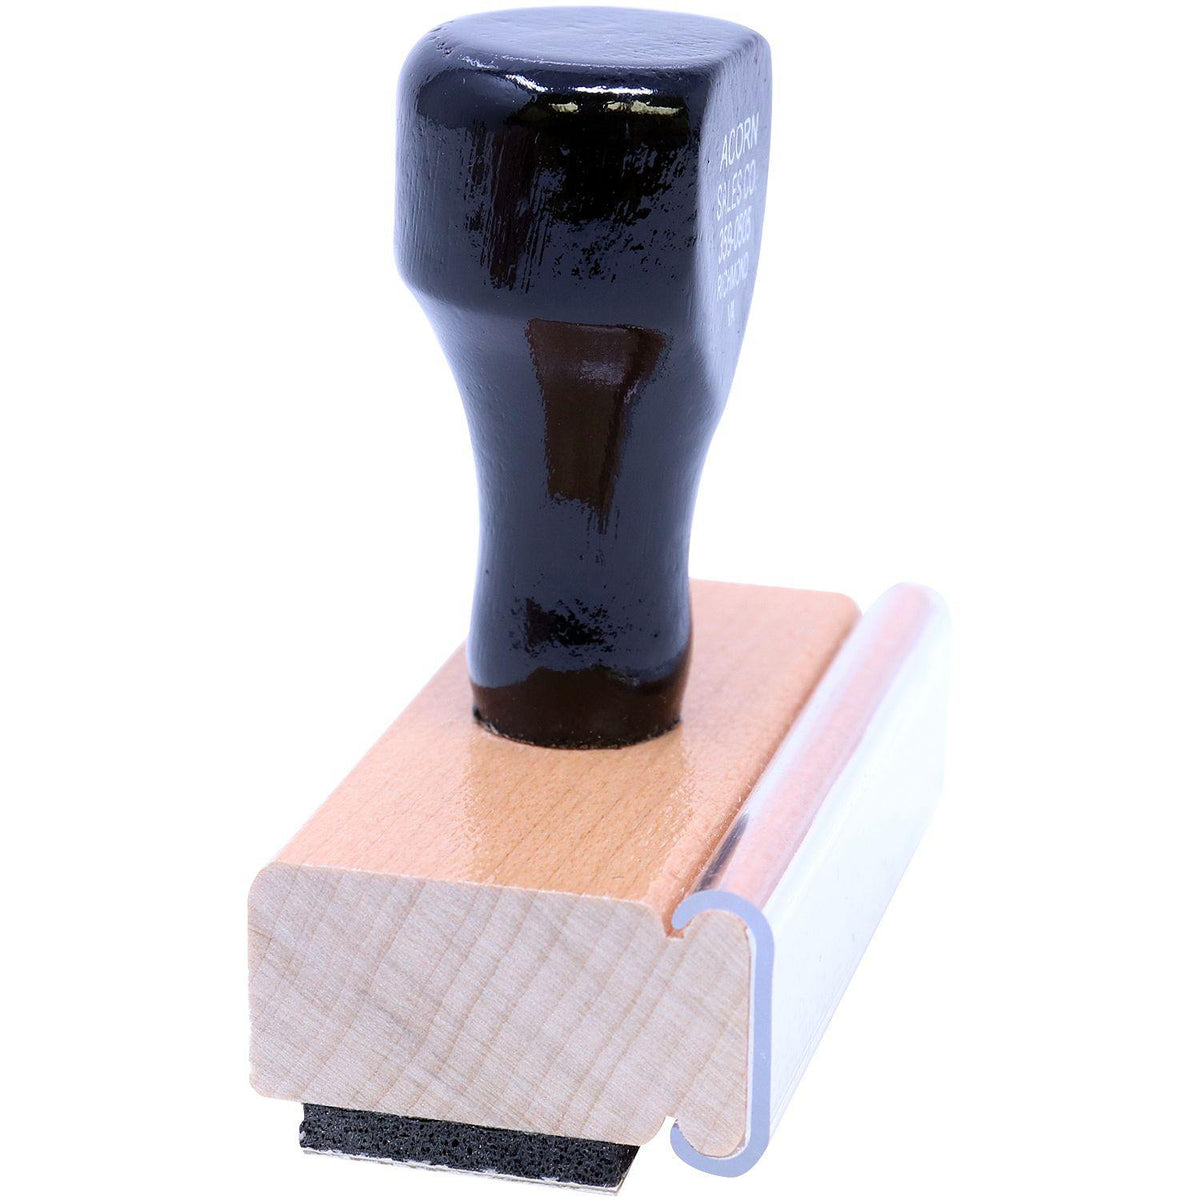 Side View of Tripilicado Rubber Stamp at an Angle